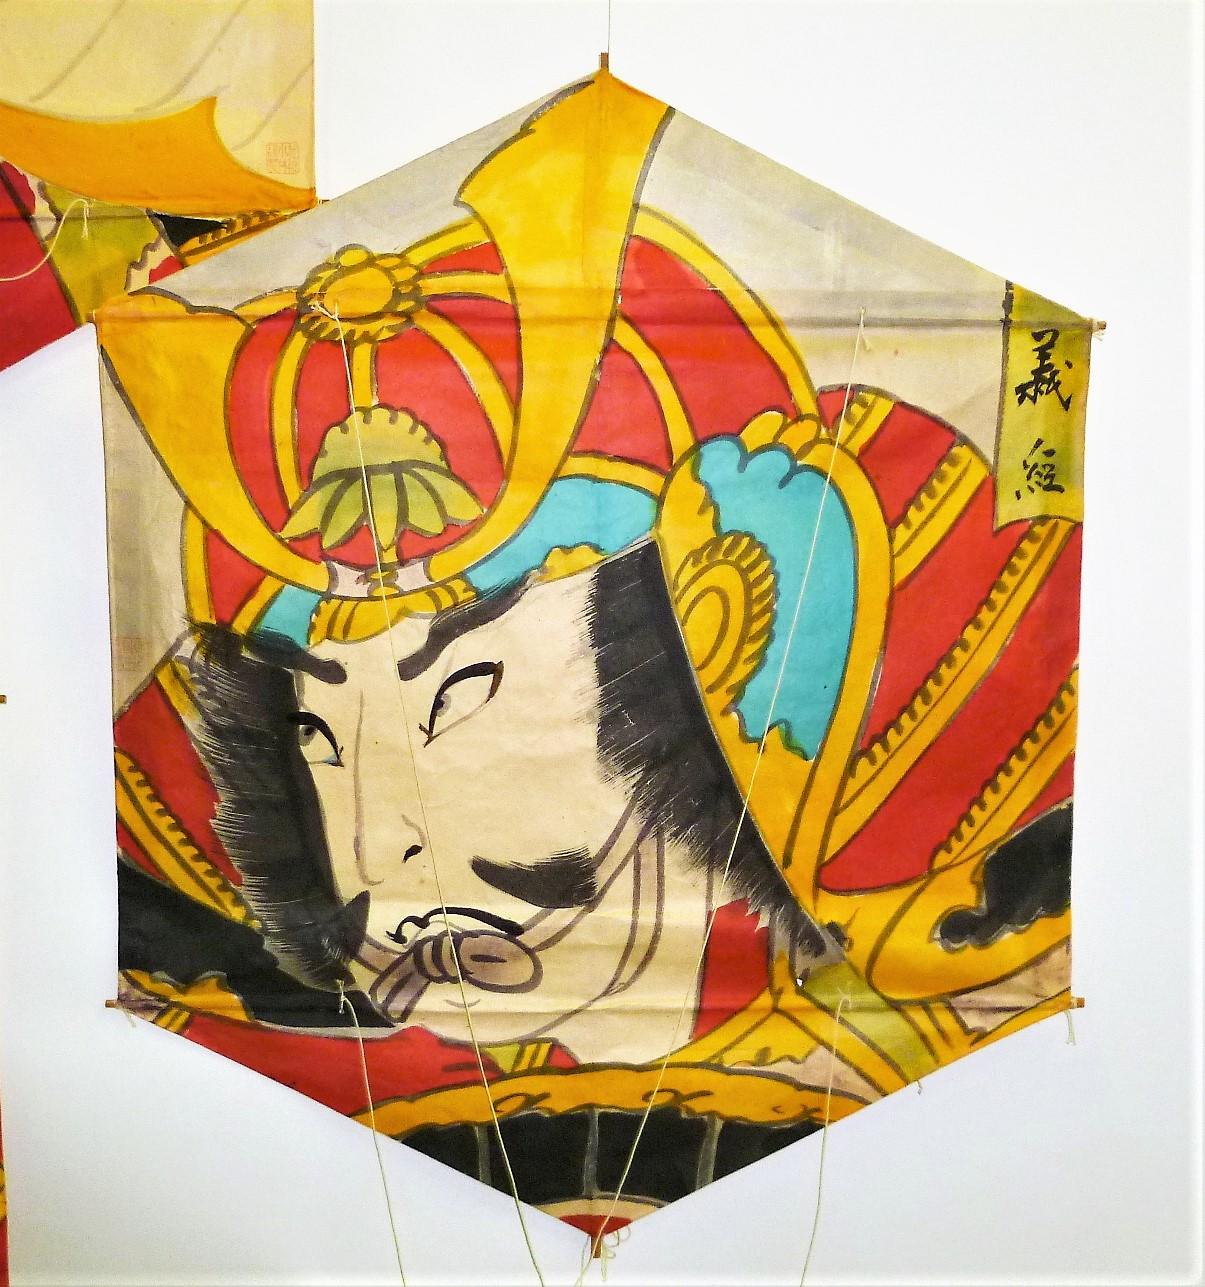 Bamboo Set of 4 Vintage Hand Painted Japanese Kites Warlord Depictions, 1970s